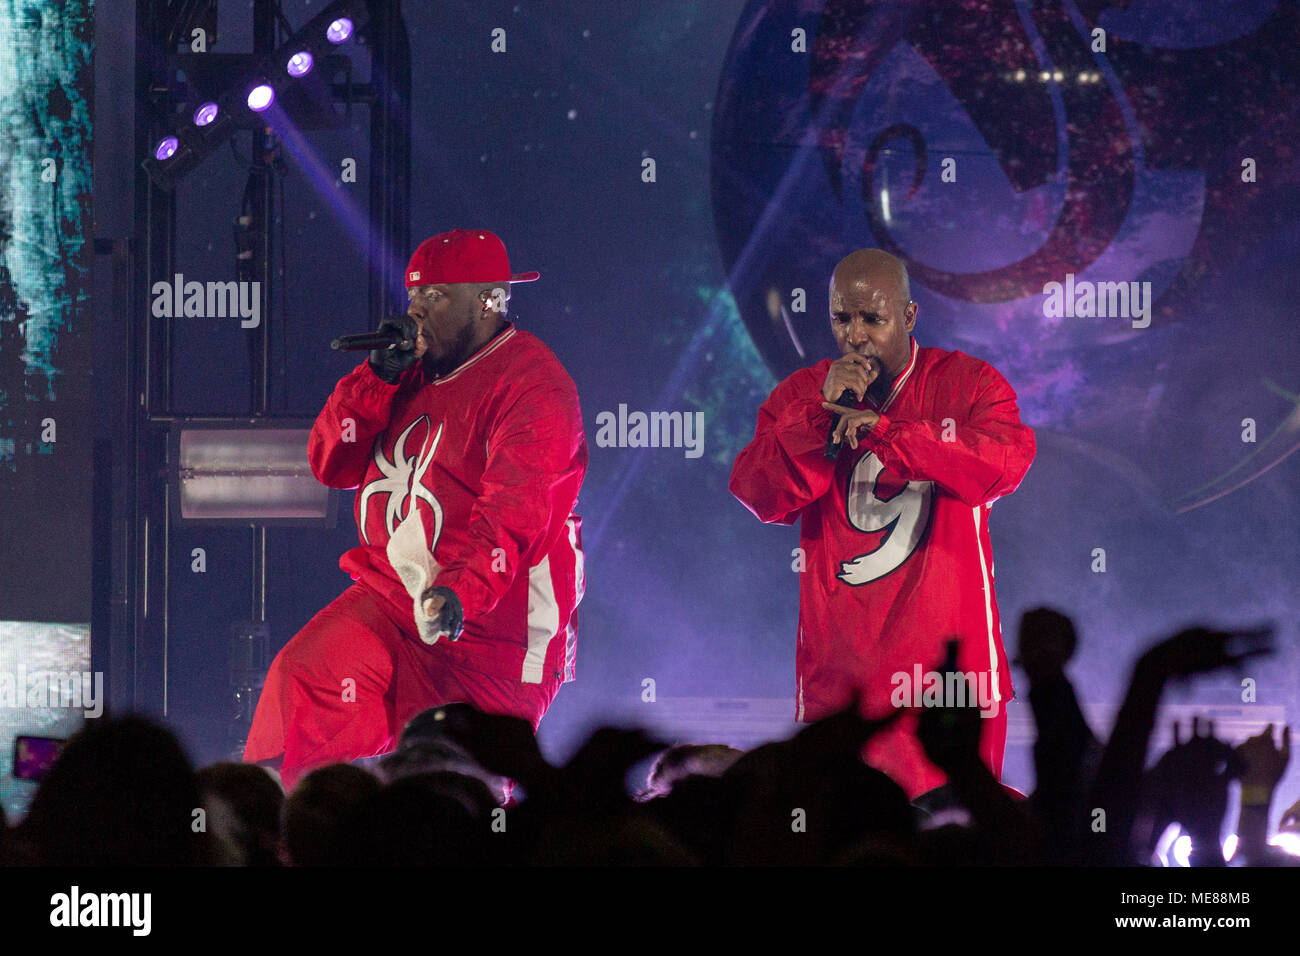 Madison, Wisconsin, USA. 20th Apr, 2018. Rappers KRIZZ KALIKO (SAMUEL  WILLIAM CHRISTOPHER WATSON IV) and TECH N9NE (AARON DONTEZ YATES) perform  in concert at the Orpheum Theater in Madison, Wisconsin Credit: Daniel